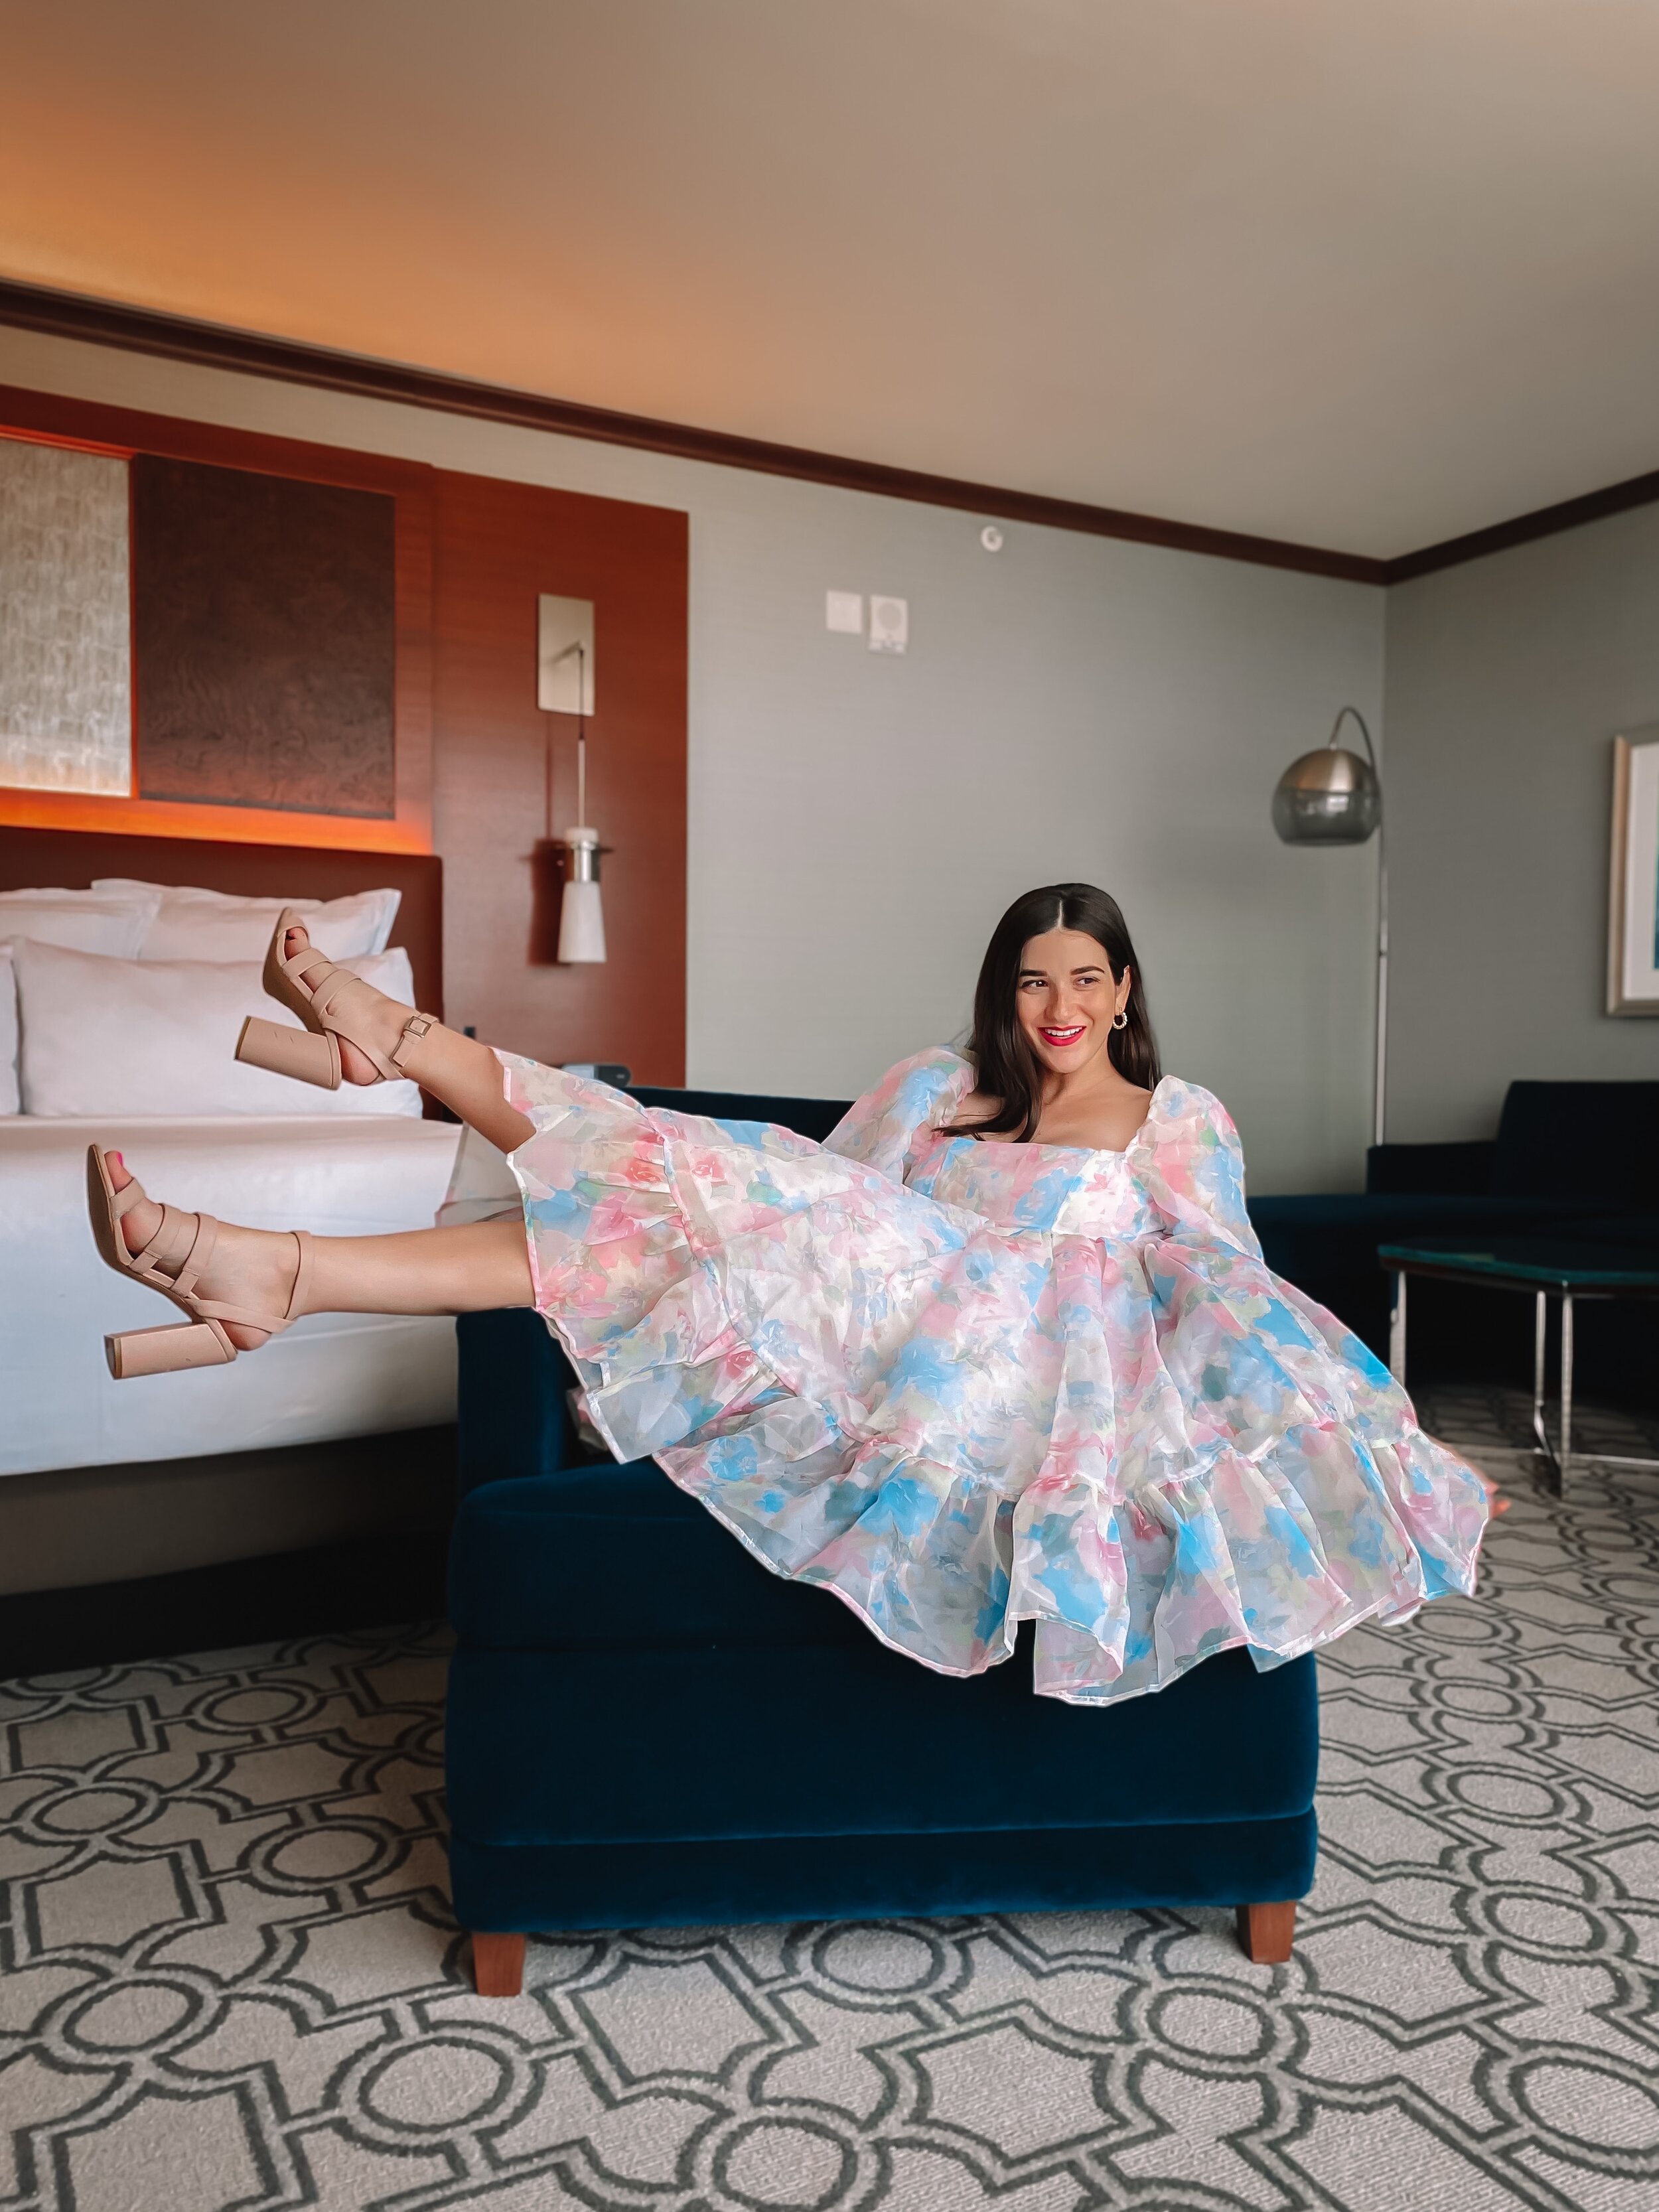 Princess Moment In Upstate New York Esther Santer NYC Street Style Blogger Hotel Puff Floral Dress Pink Heels Pastel Goodnight Macaroon Fun Poses Heels Women Girl Resort World Casino Suite Summer Styling What to Wear Fancy Trendy Shop Pretty.JPG